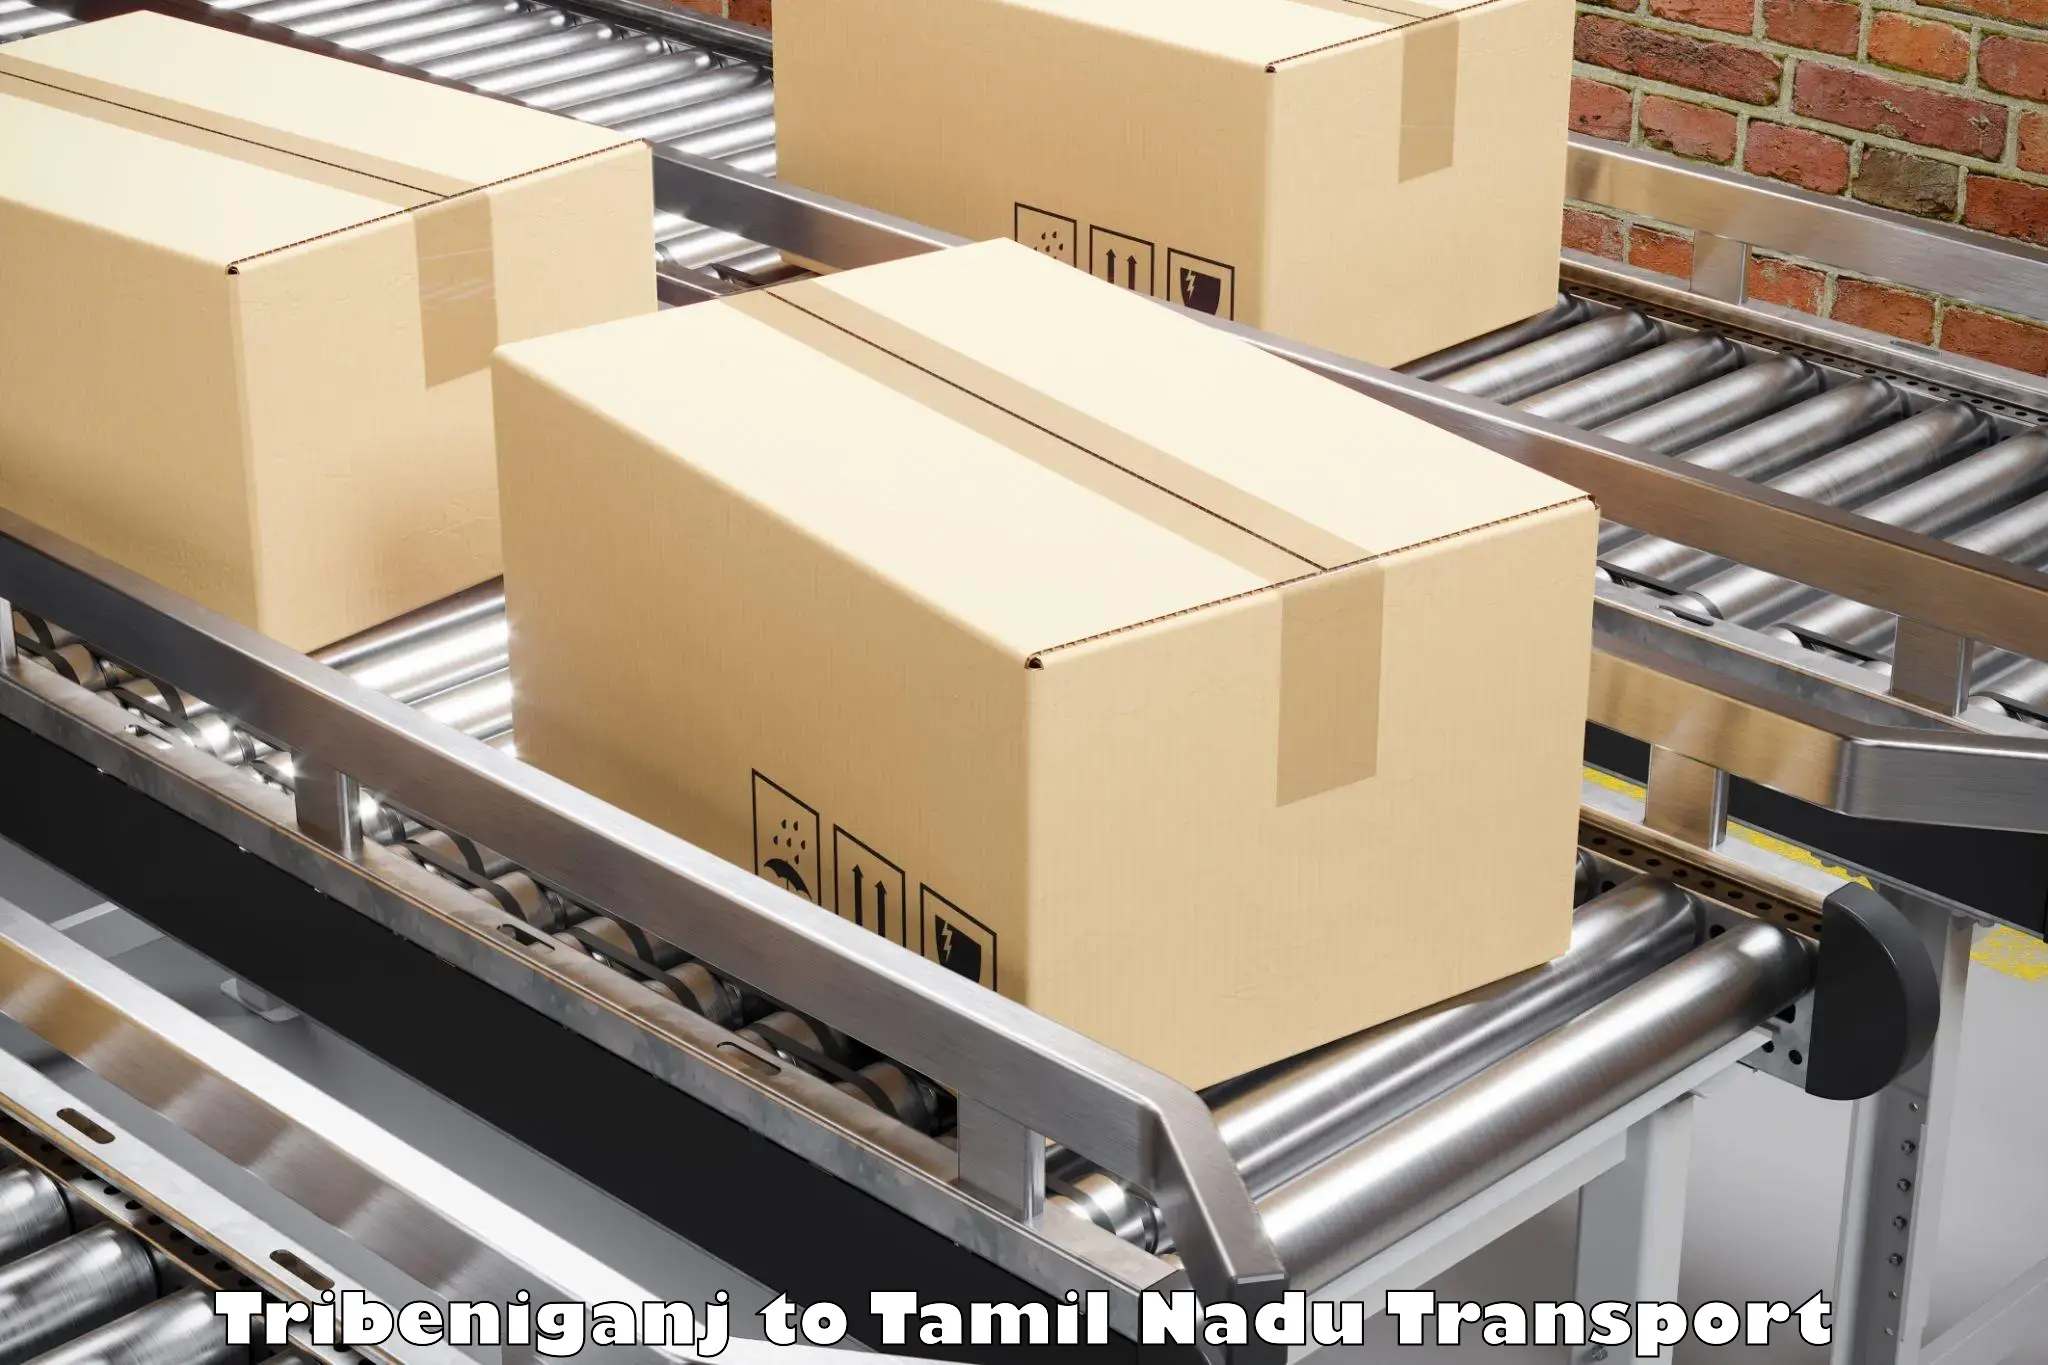 Material transport services Tribeniganj to SRM Institute of Science and Technology Chennai